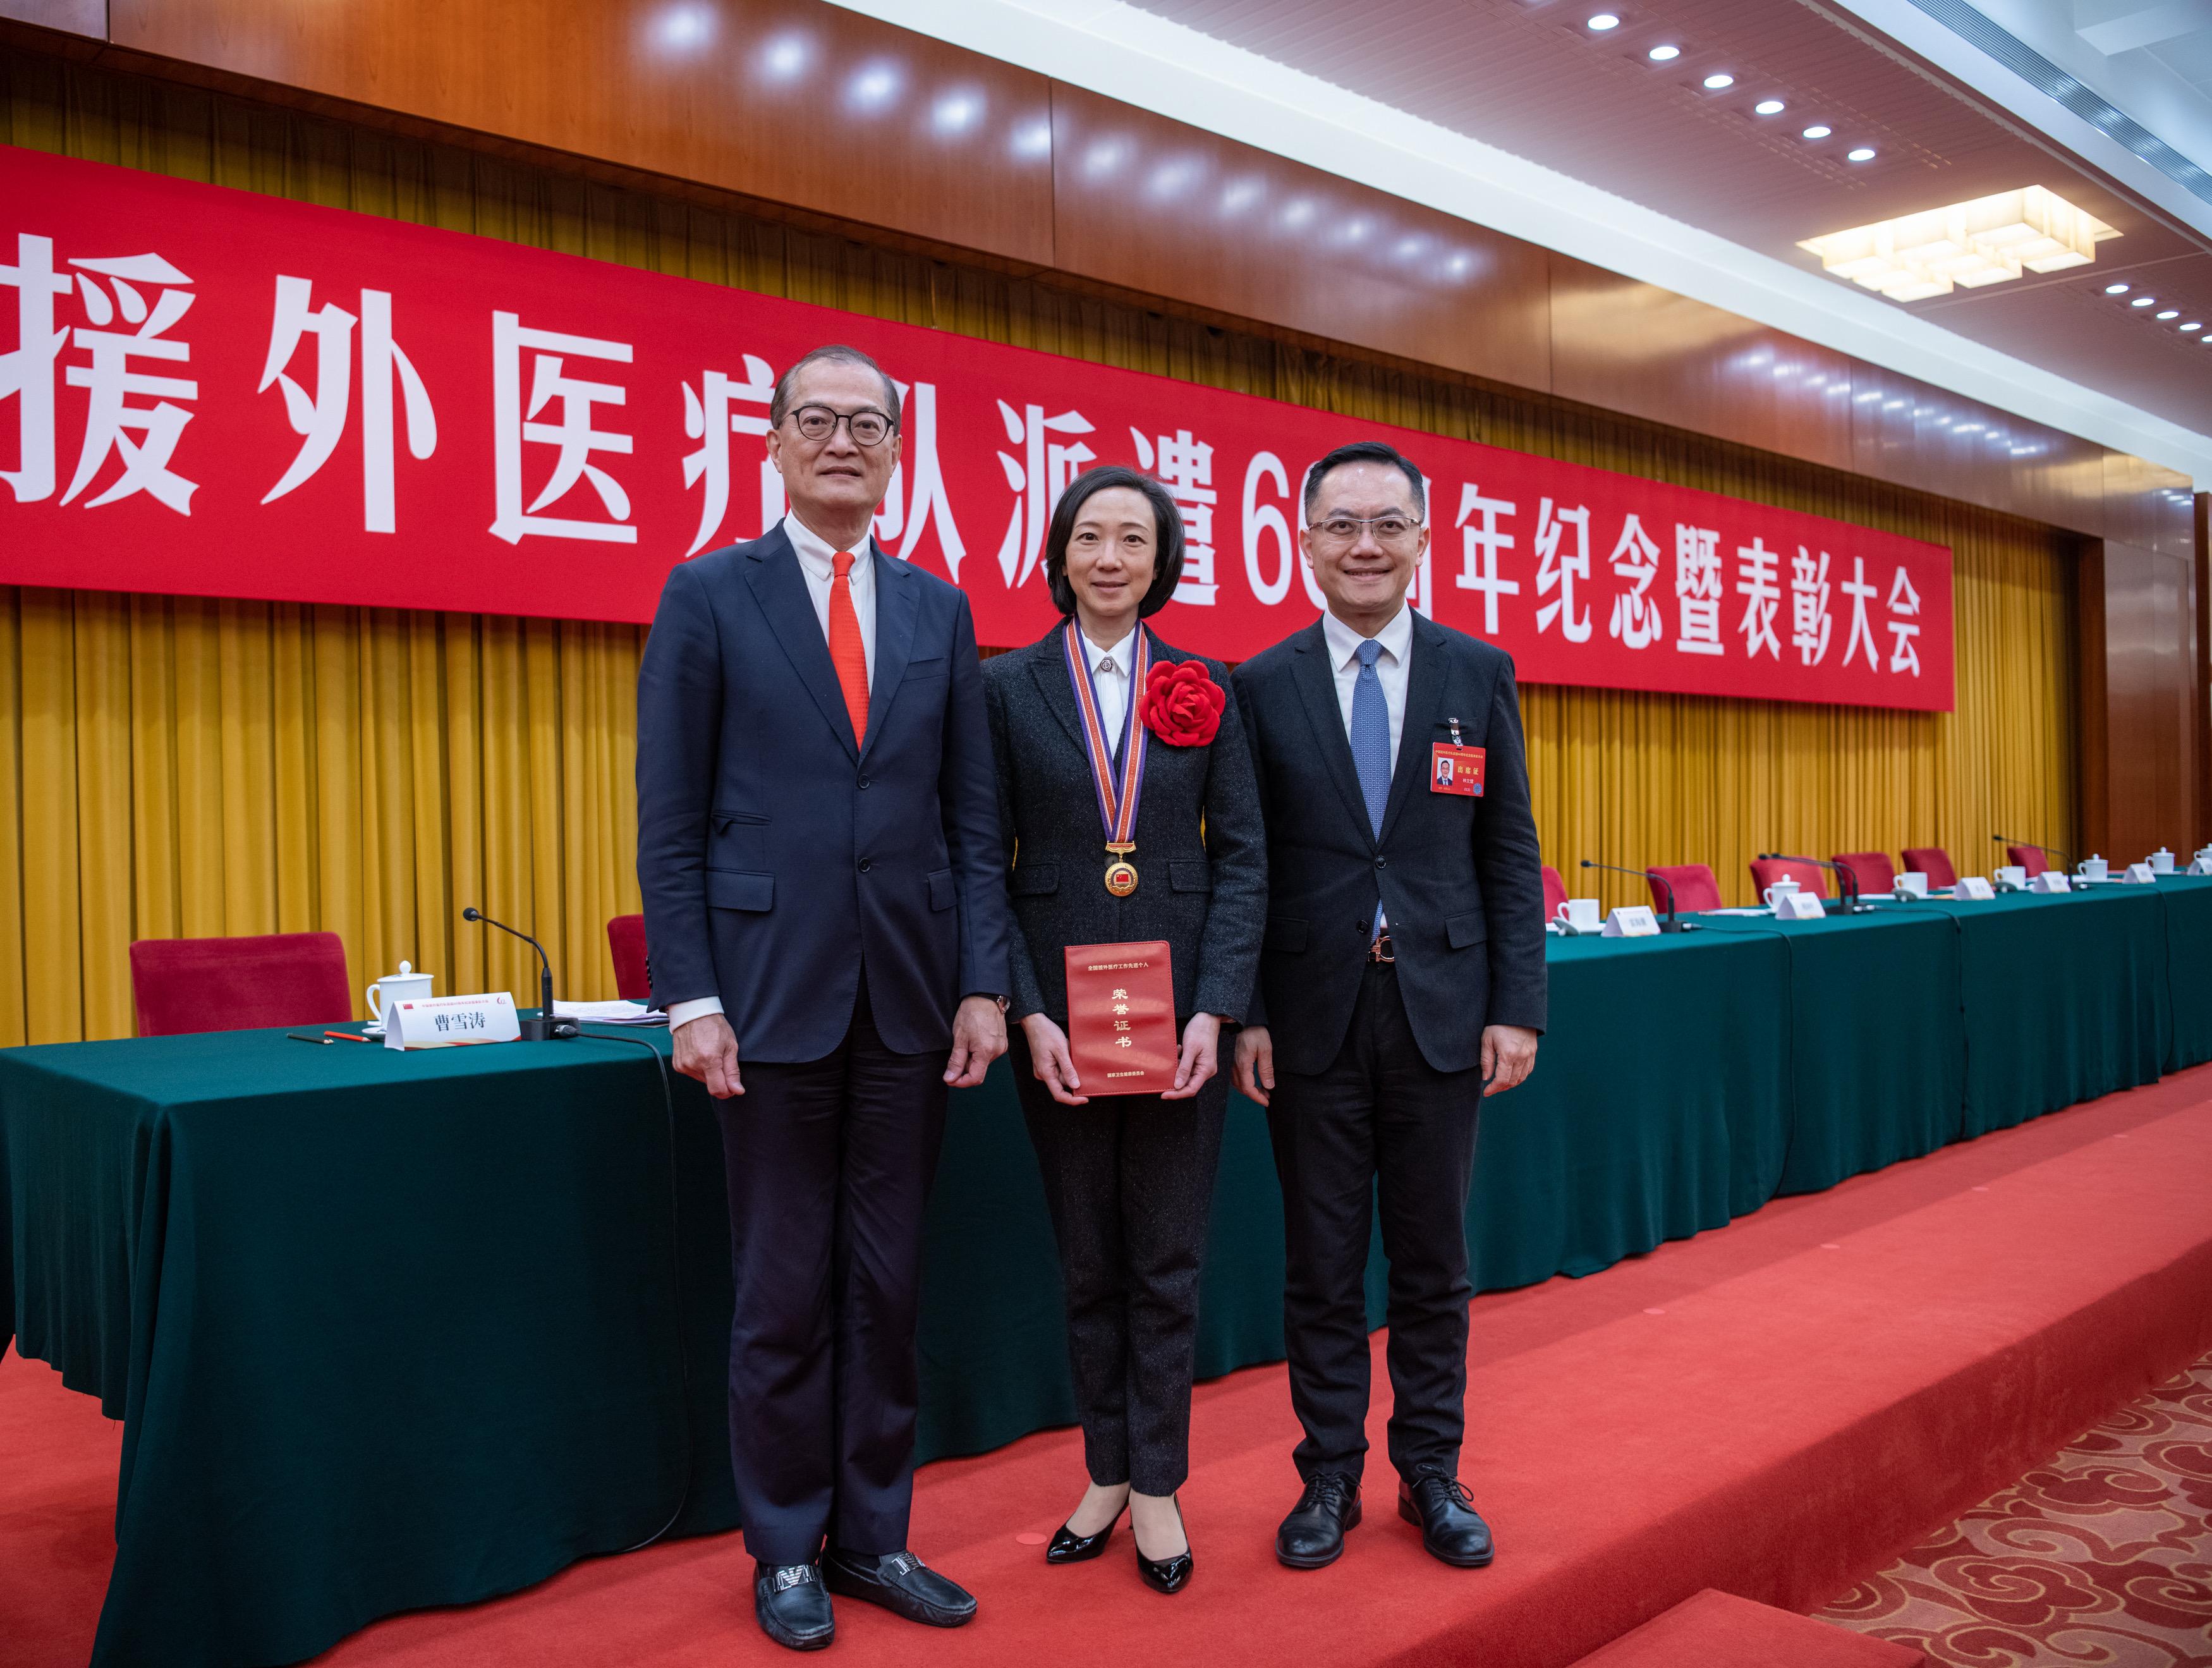 The Secretary for Health, Professor Lo Chung-mau (left), and the Director of Health, Dr Ronald Lam (right), attend a national recognition ceremony for outstanding individuals in foreign medical aid in Beijing today (December 29) to witness Consultant (Family Medicine) of the Department of Health Dr Cecilia Fan (centre) being recognised by the country for her participation in the Hong Kong Special Administrative Region search and rescue team's work in quake-stricken Türkiye.